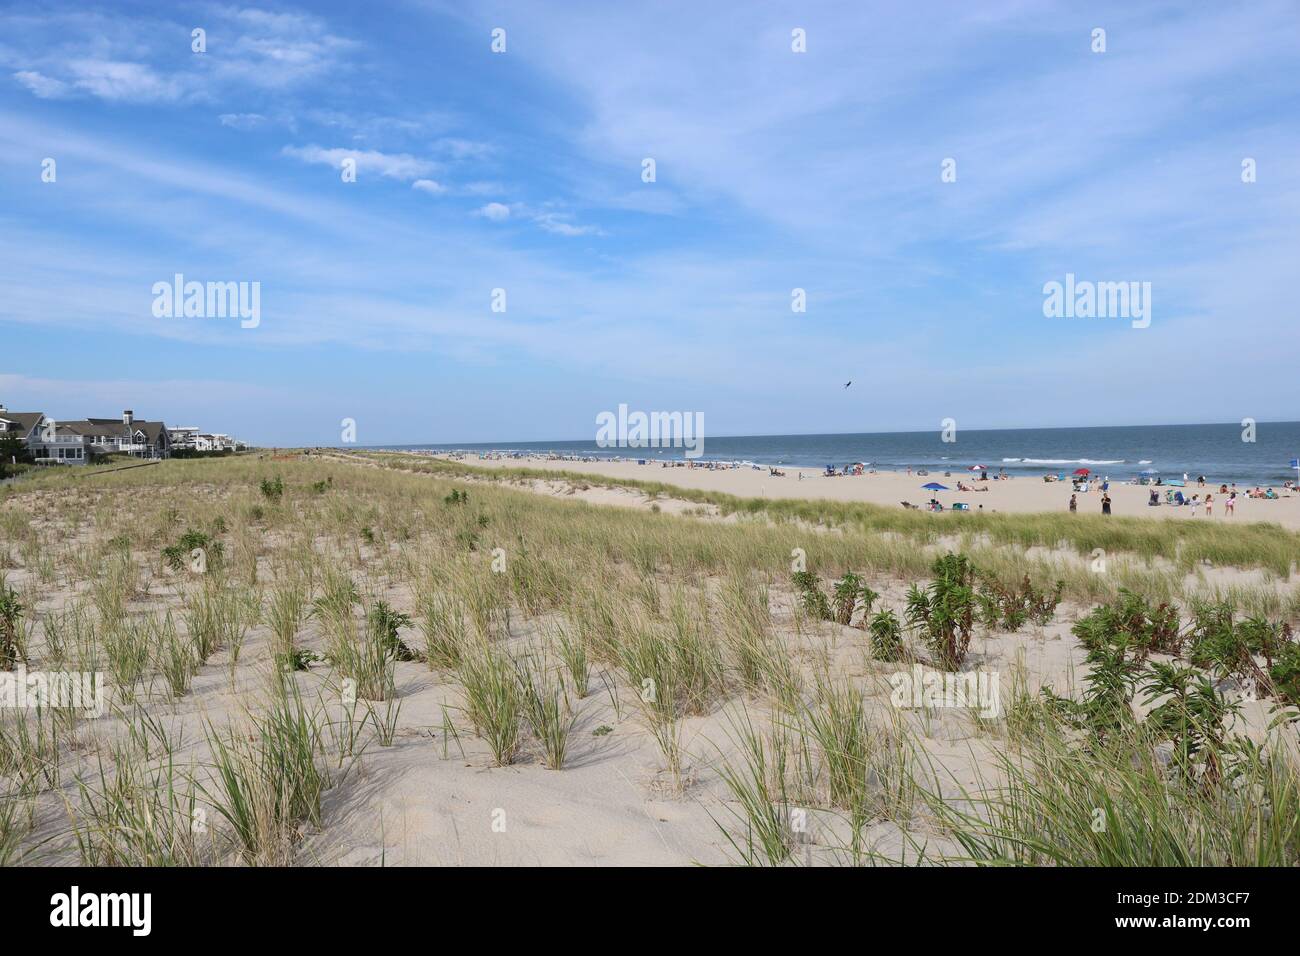 Landscape view of a beach in Long Beach Island in the middle of the summer with sand, sun, clouds, and dunes. Stock Photo